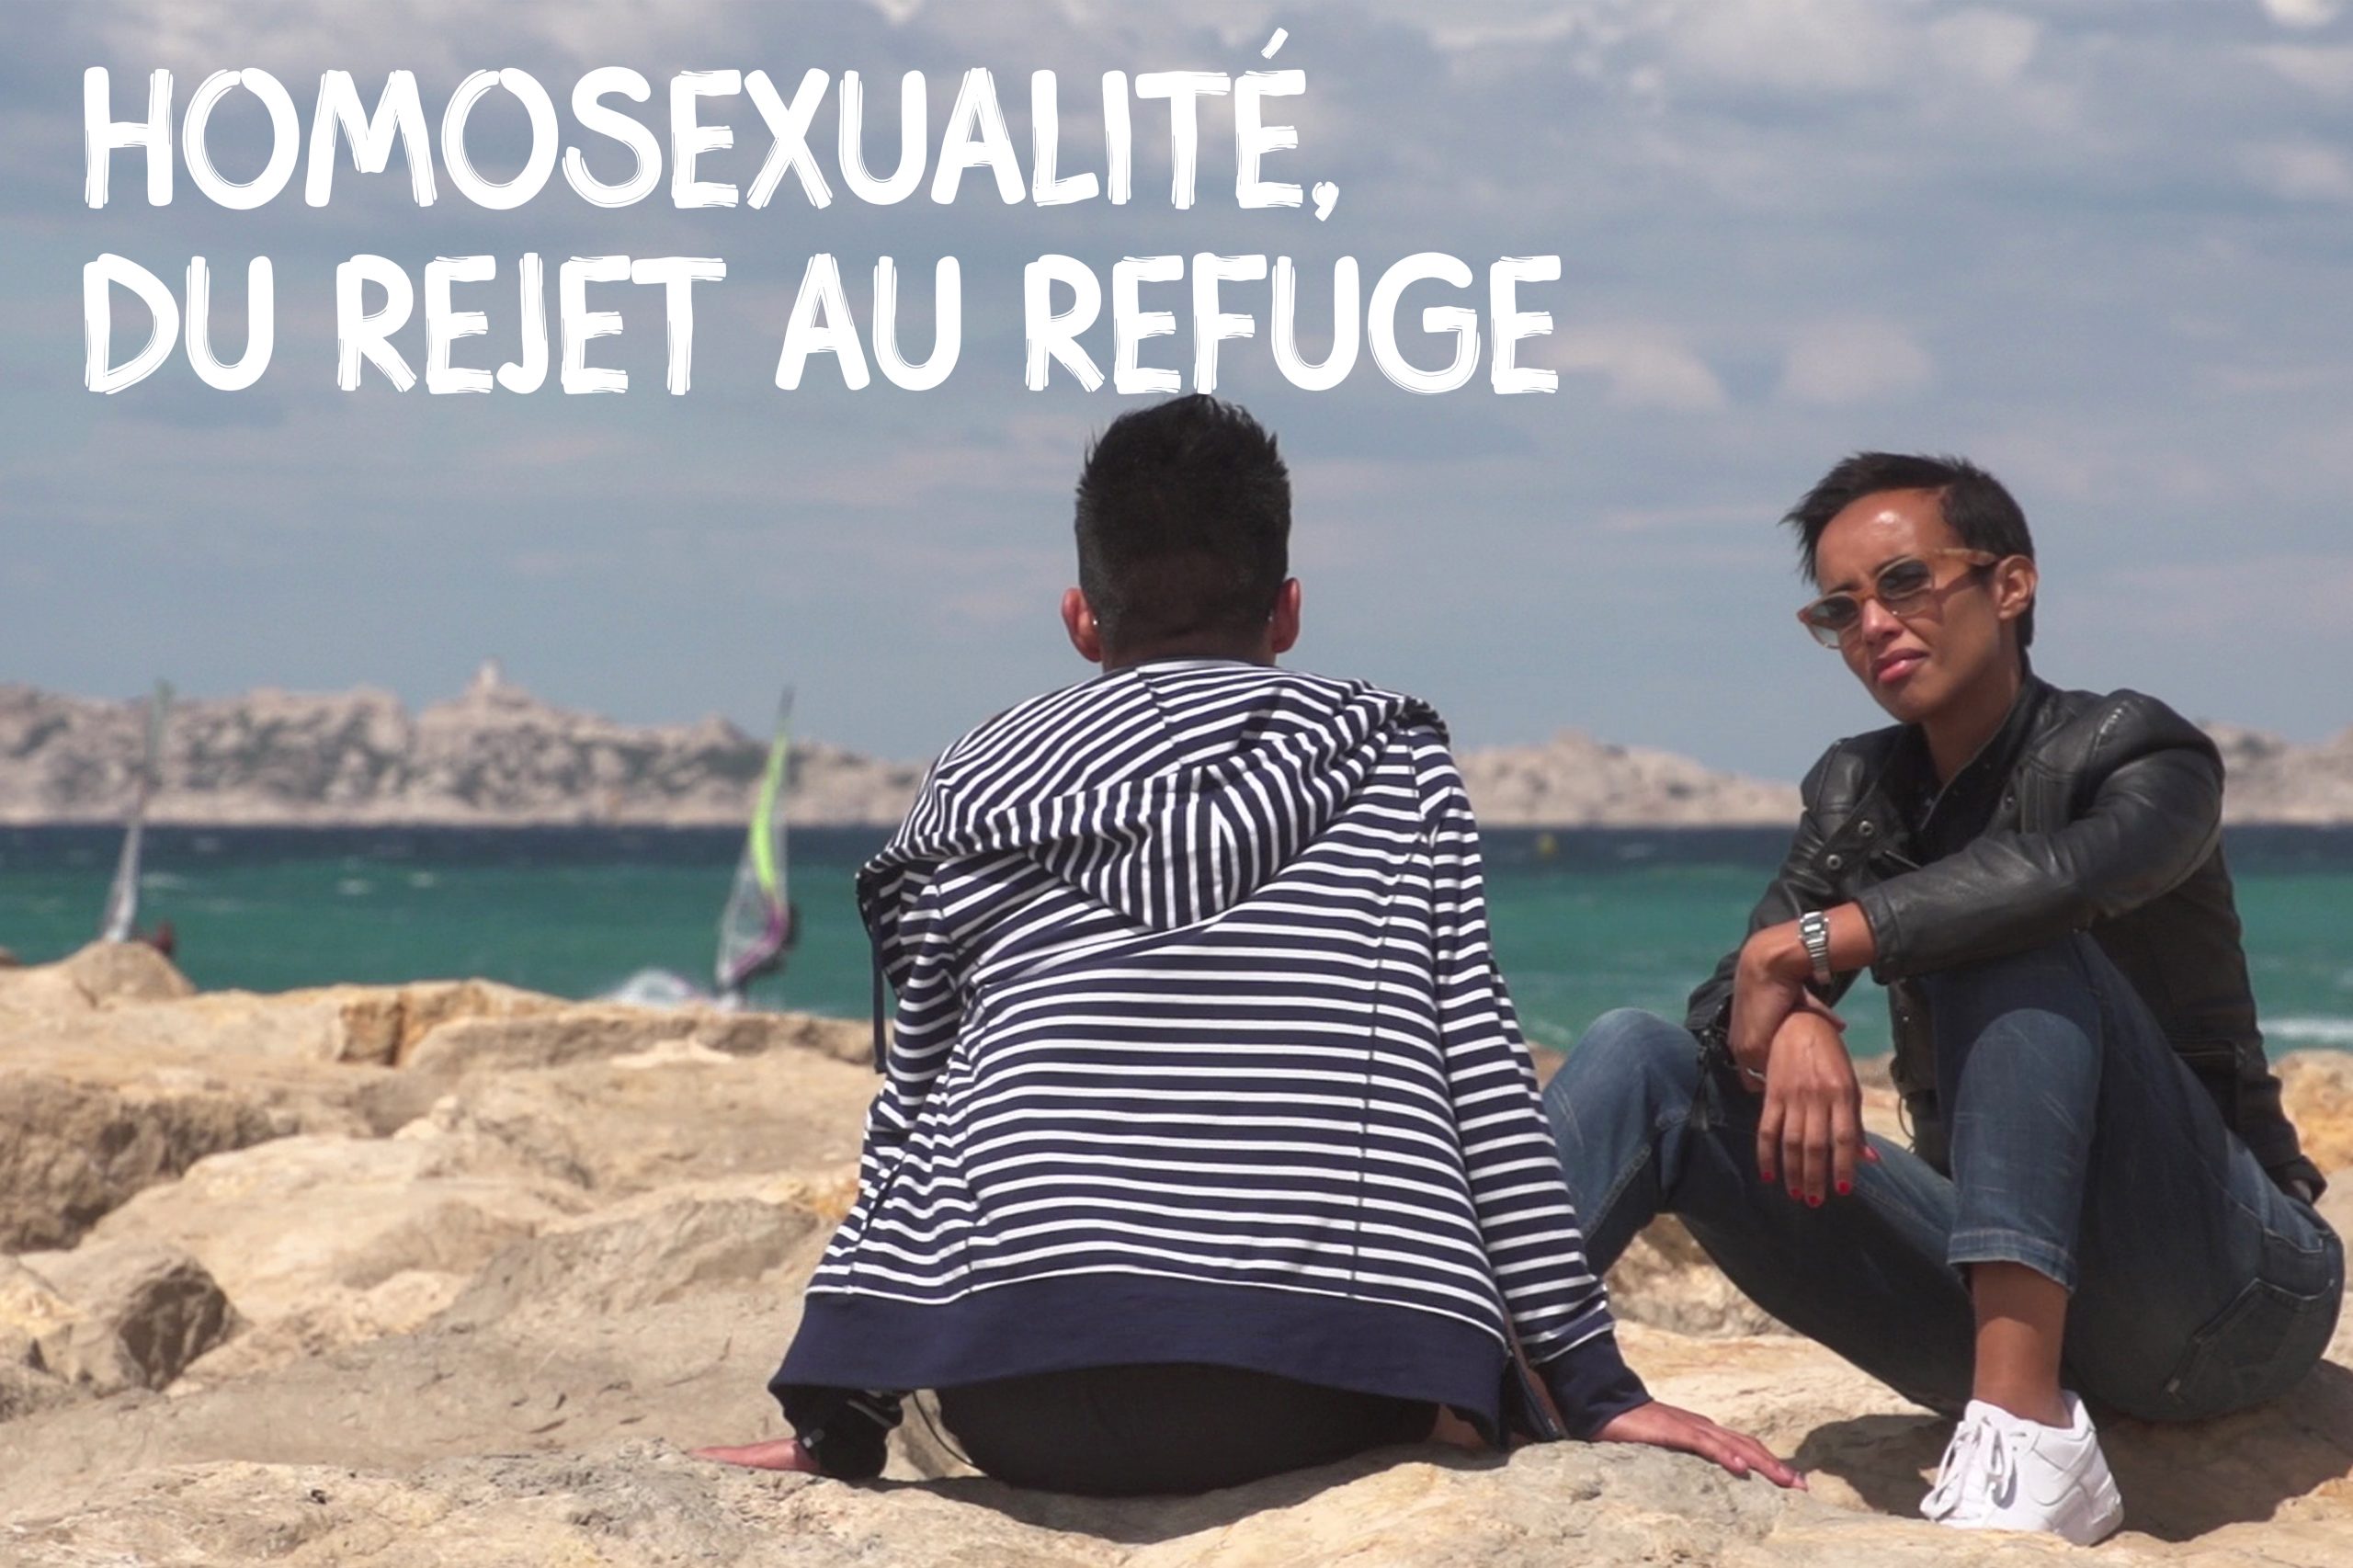 Homosexuality: From Rejection to Refuge